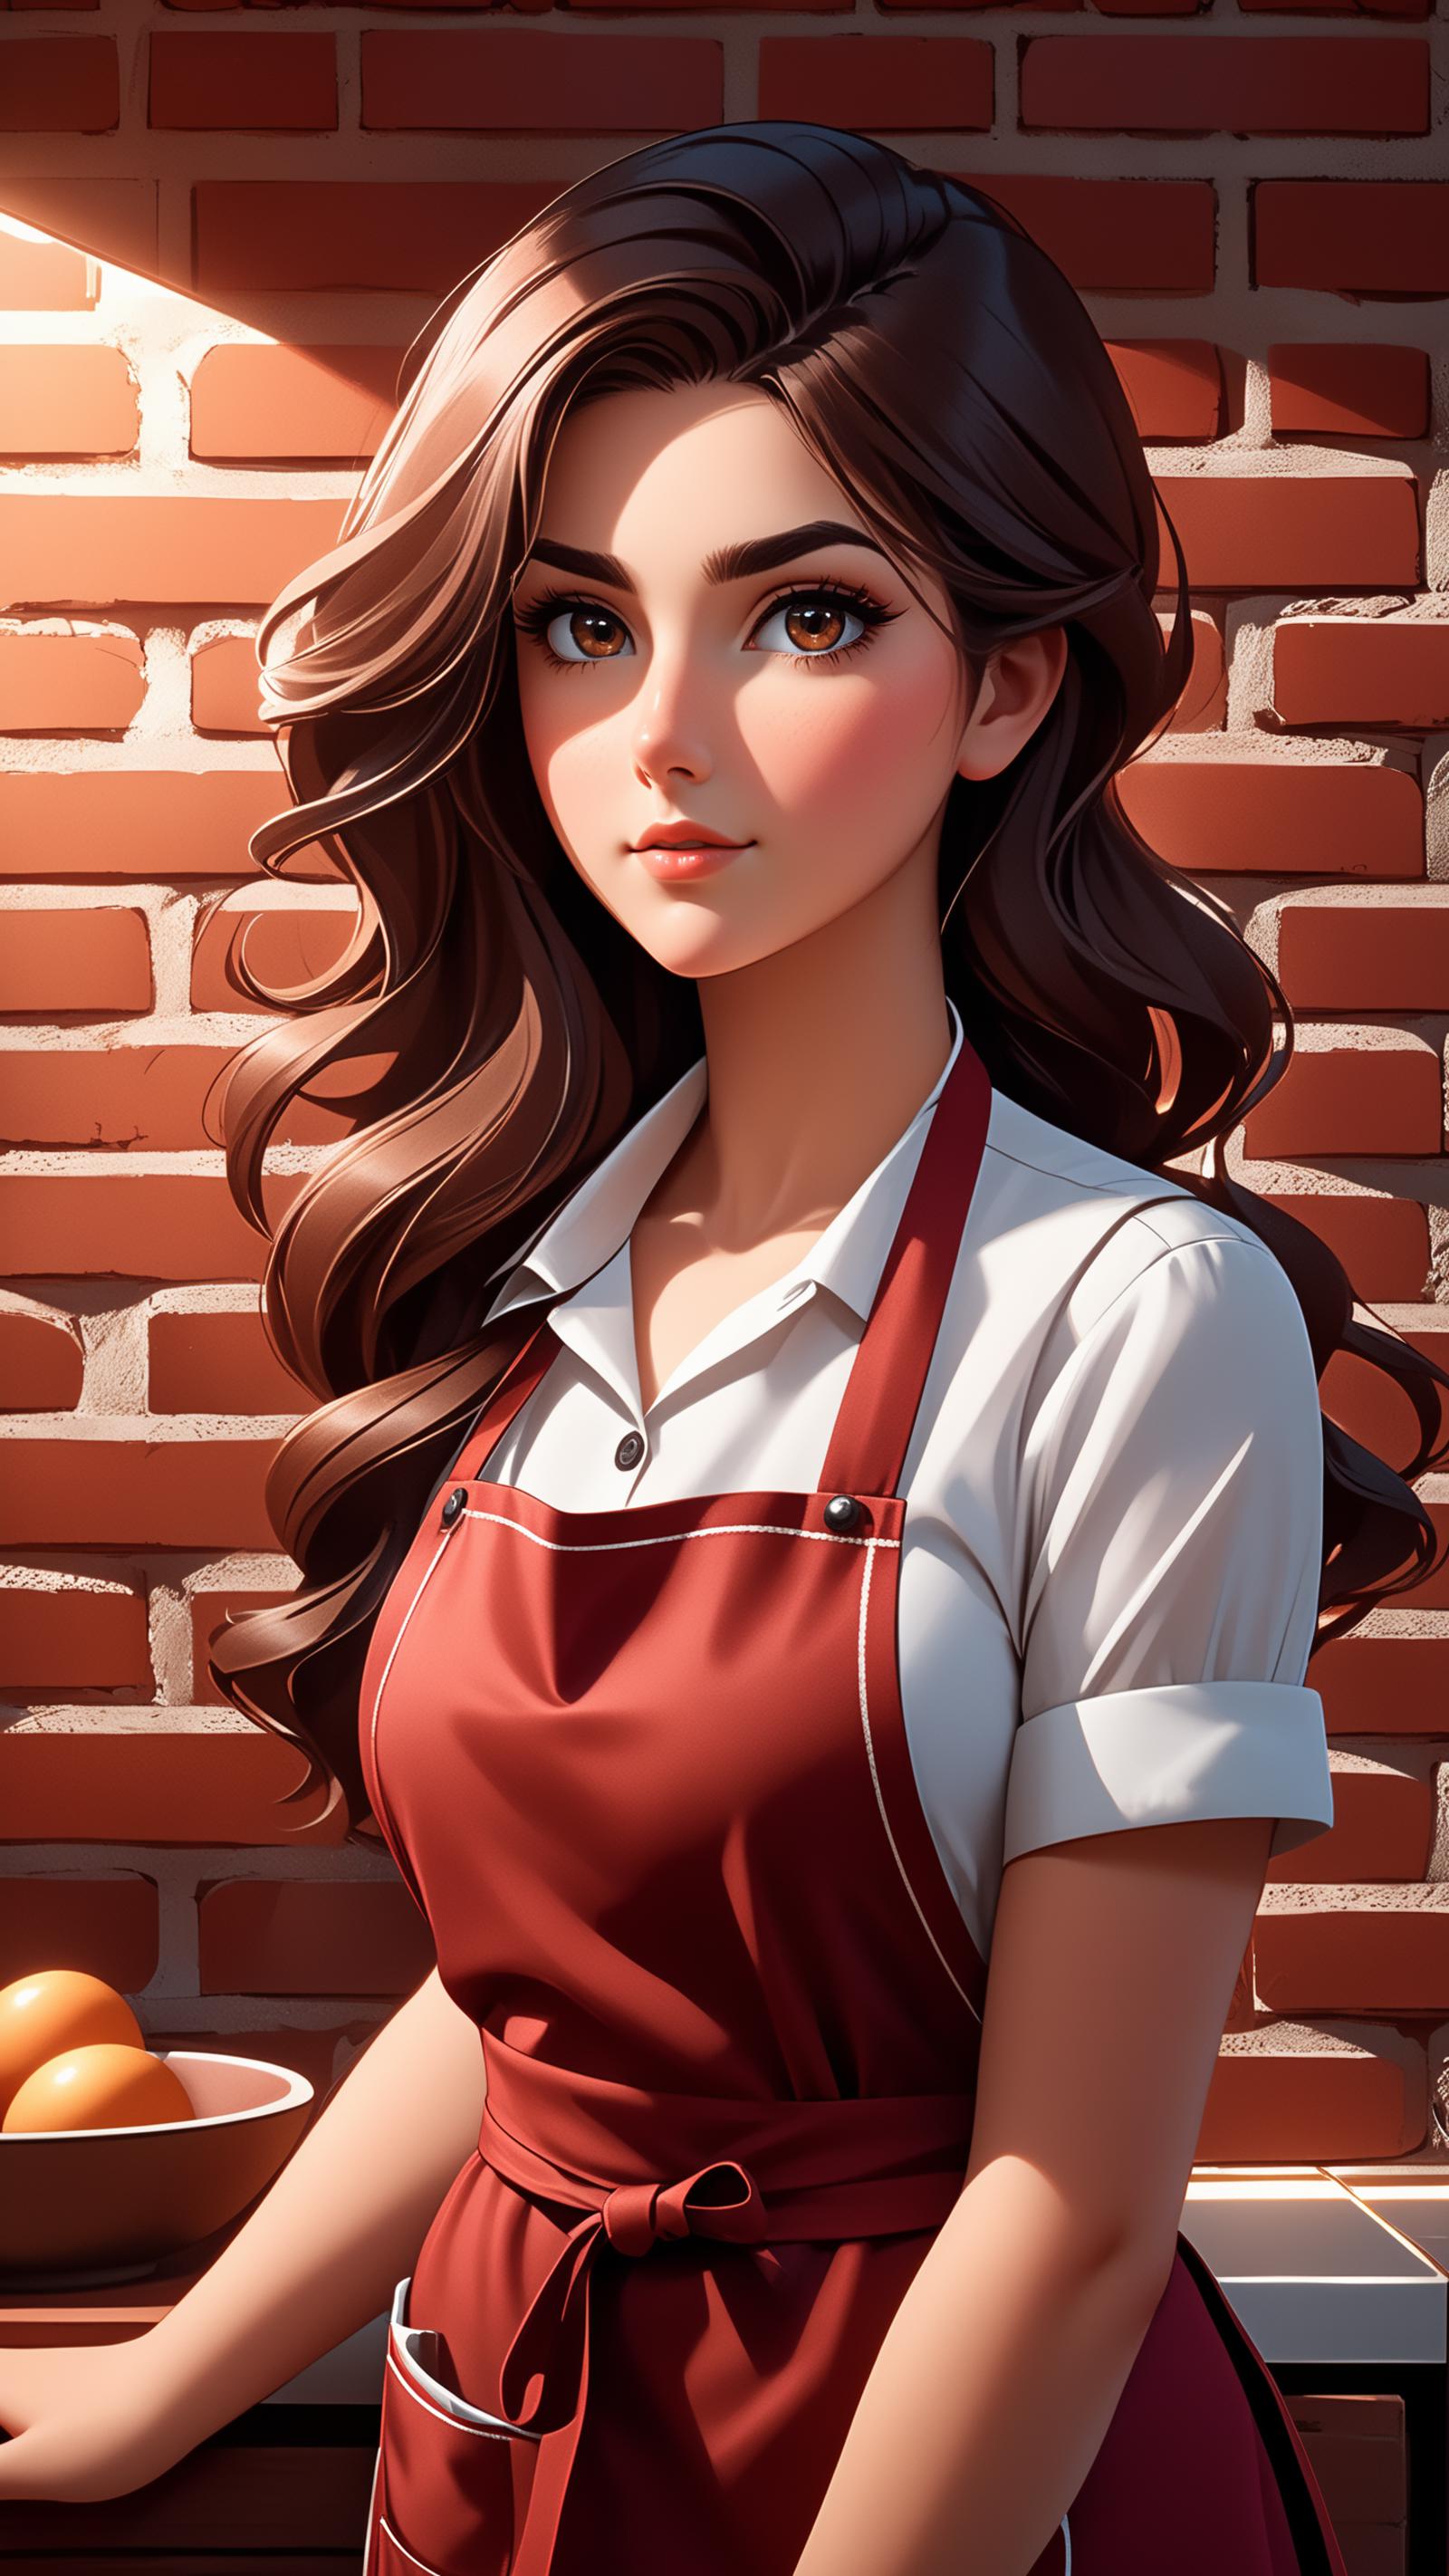 A beautiful, illustrated woman with a red apron and white shirt, standing in front of a brick wall.